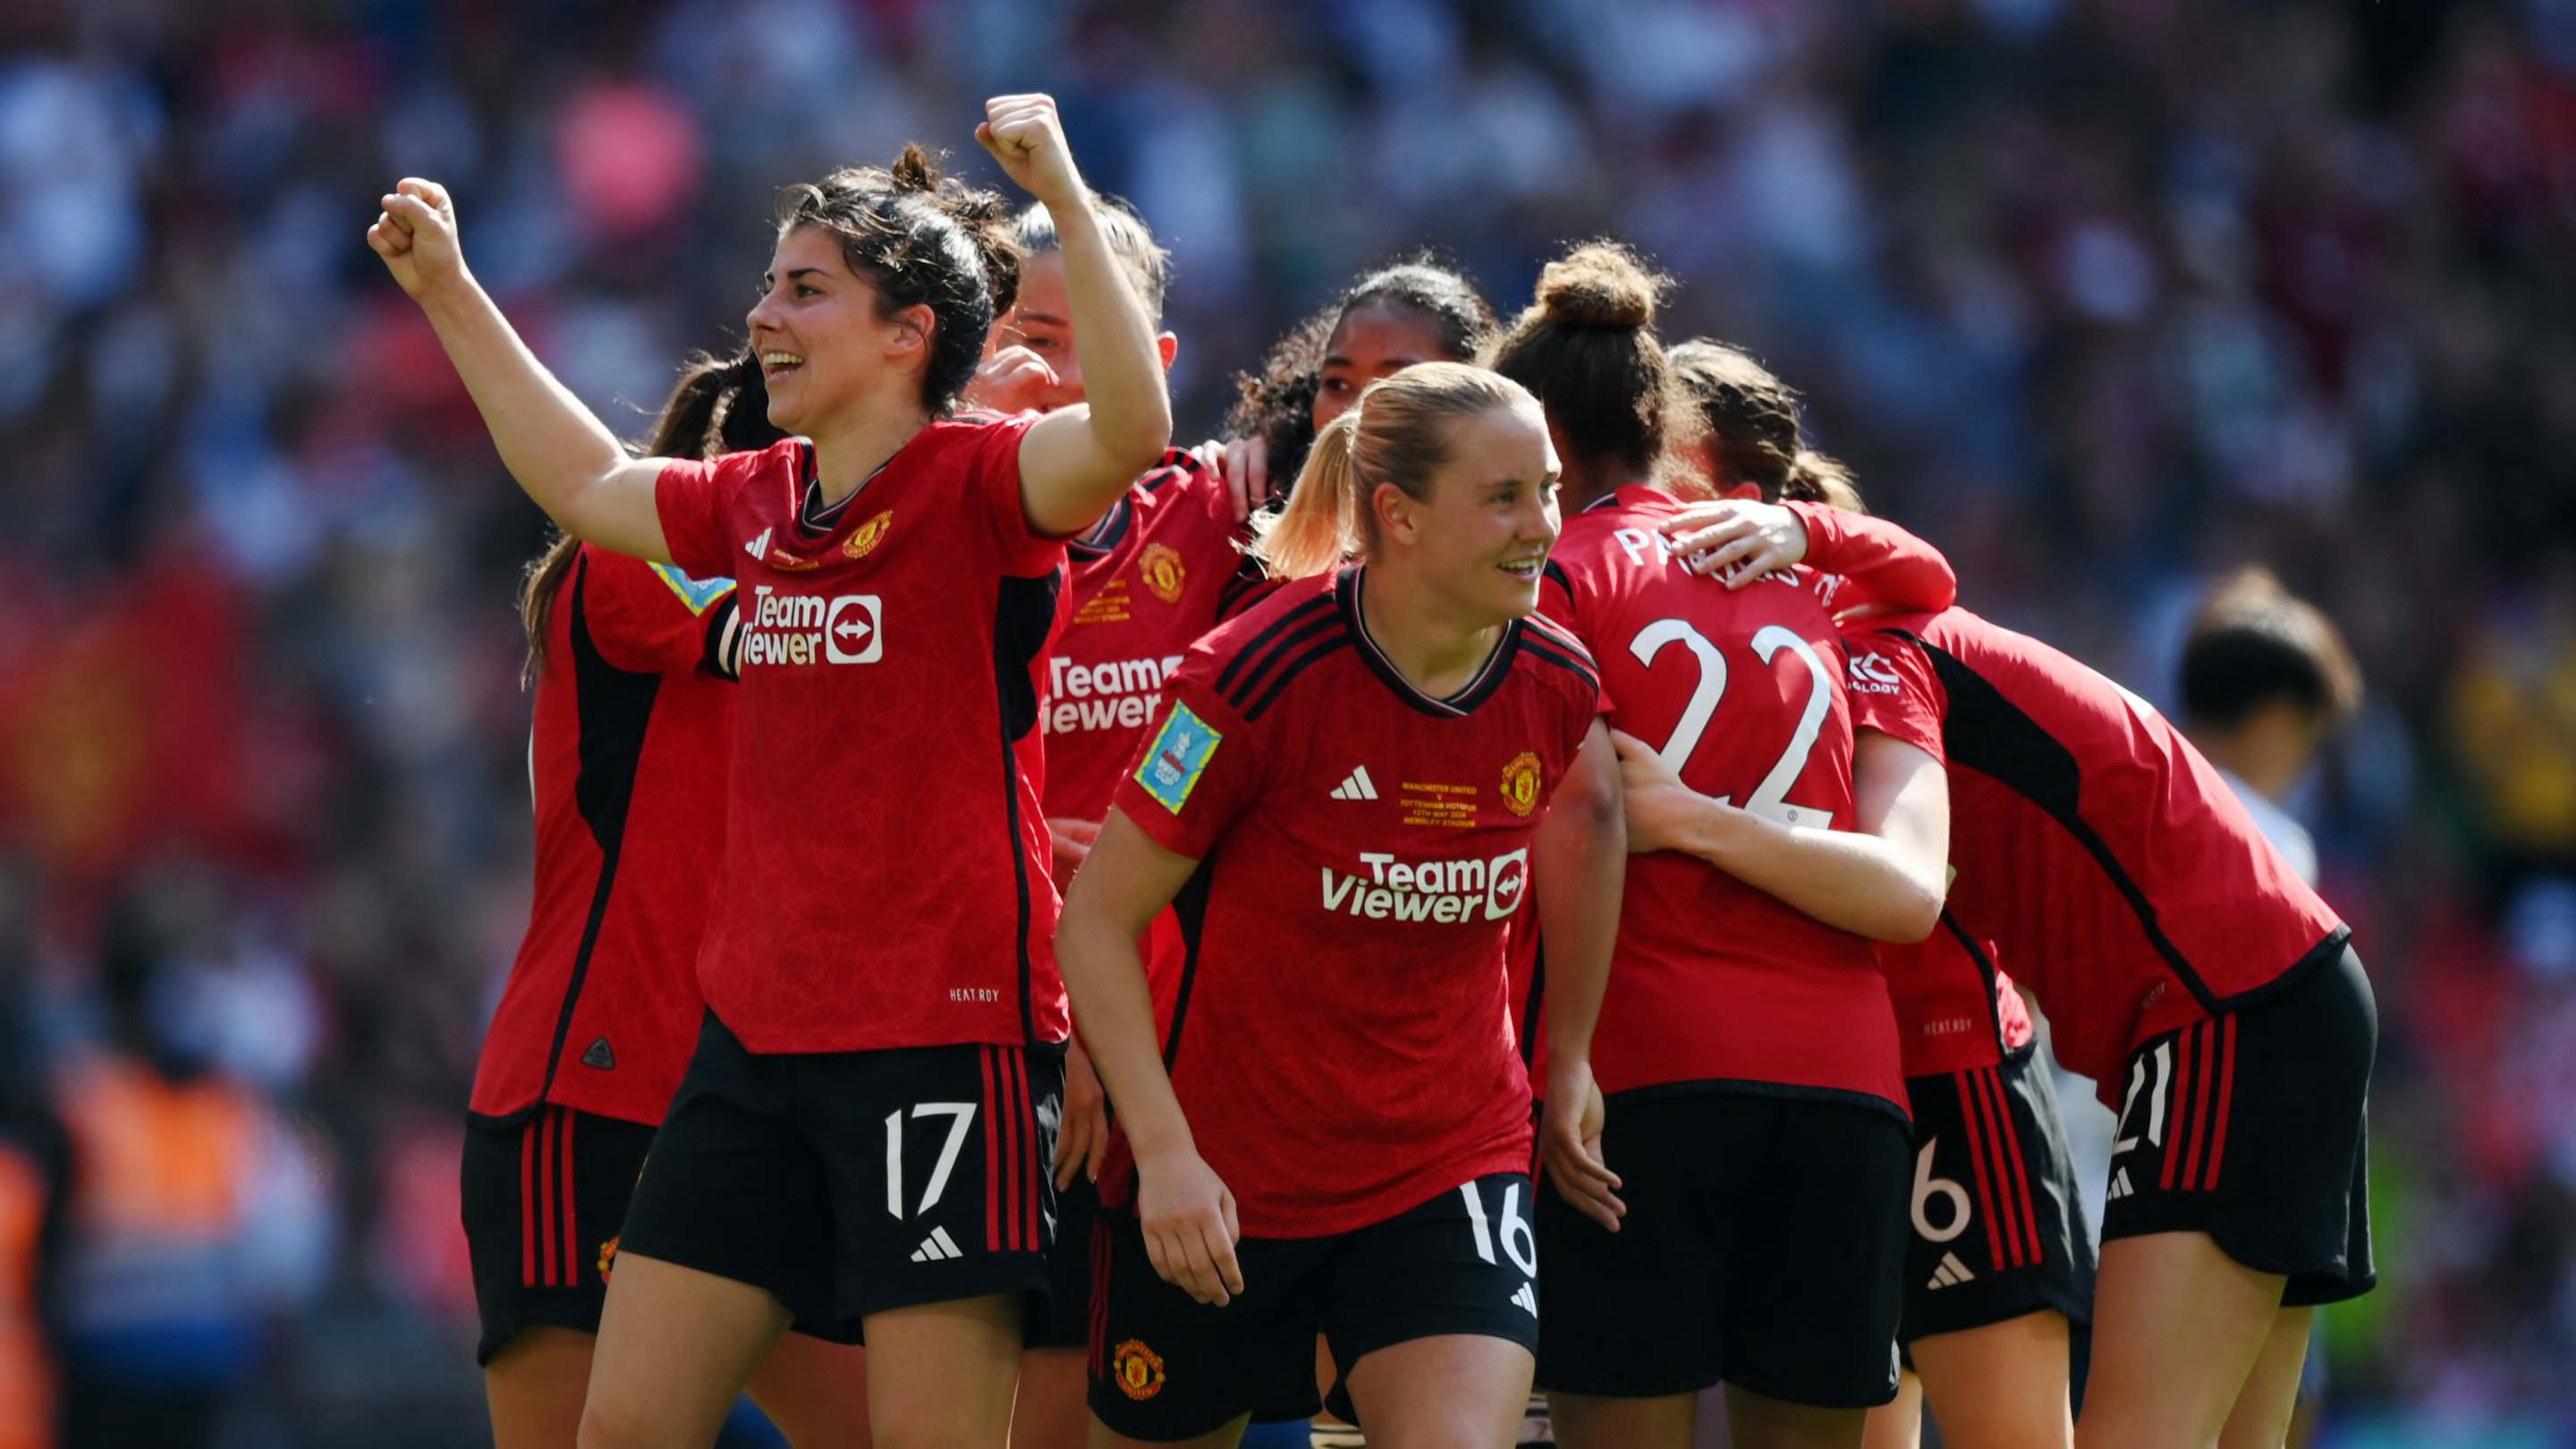 Man Utd 4-0 Tottenham: Player ratings as United cruise to Women's FA Cup glory